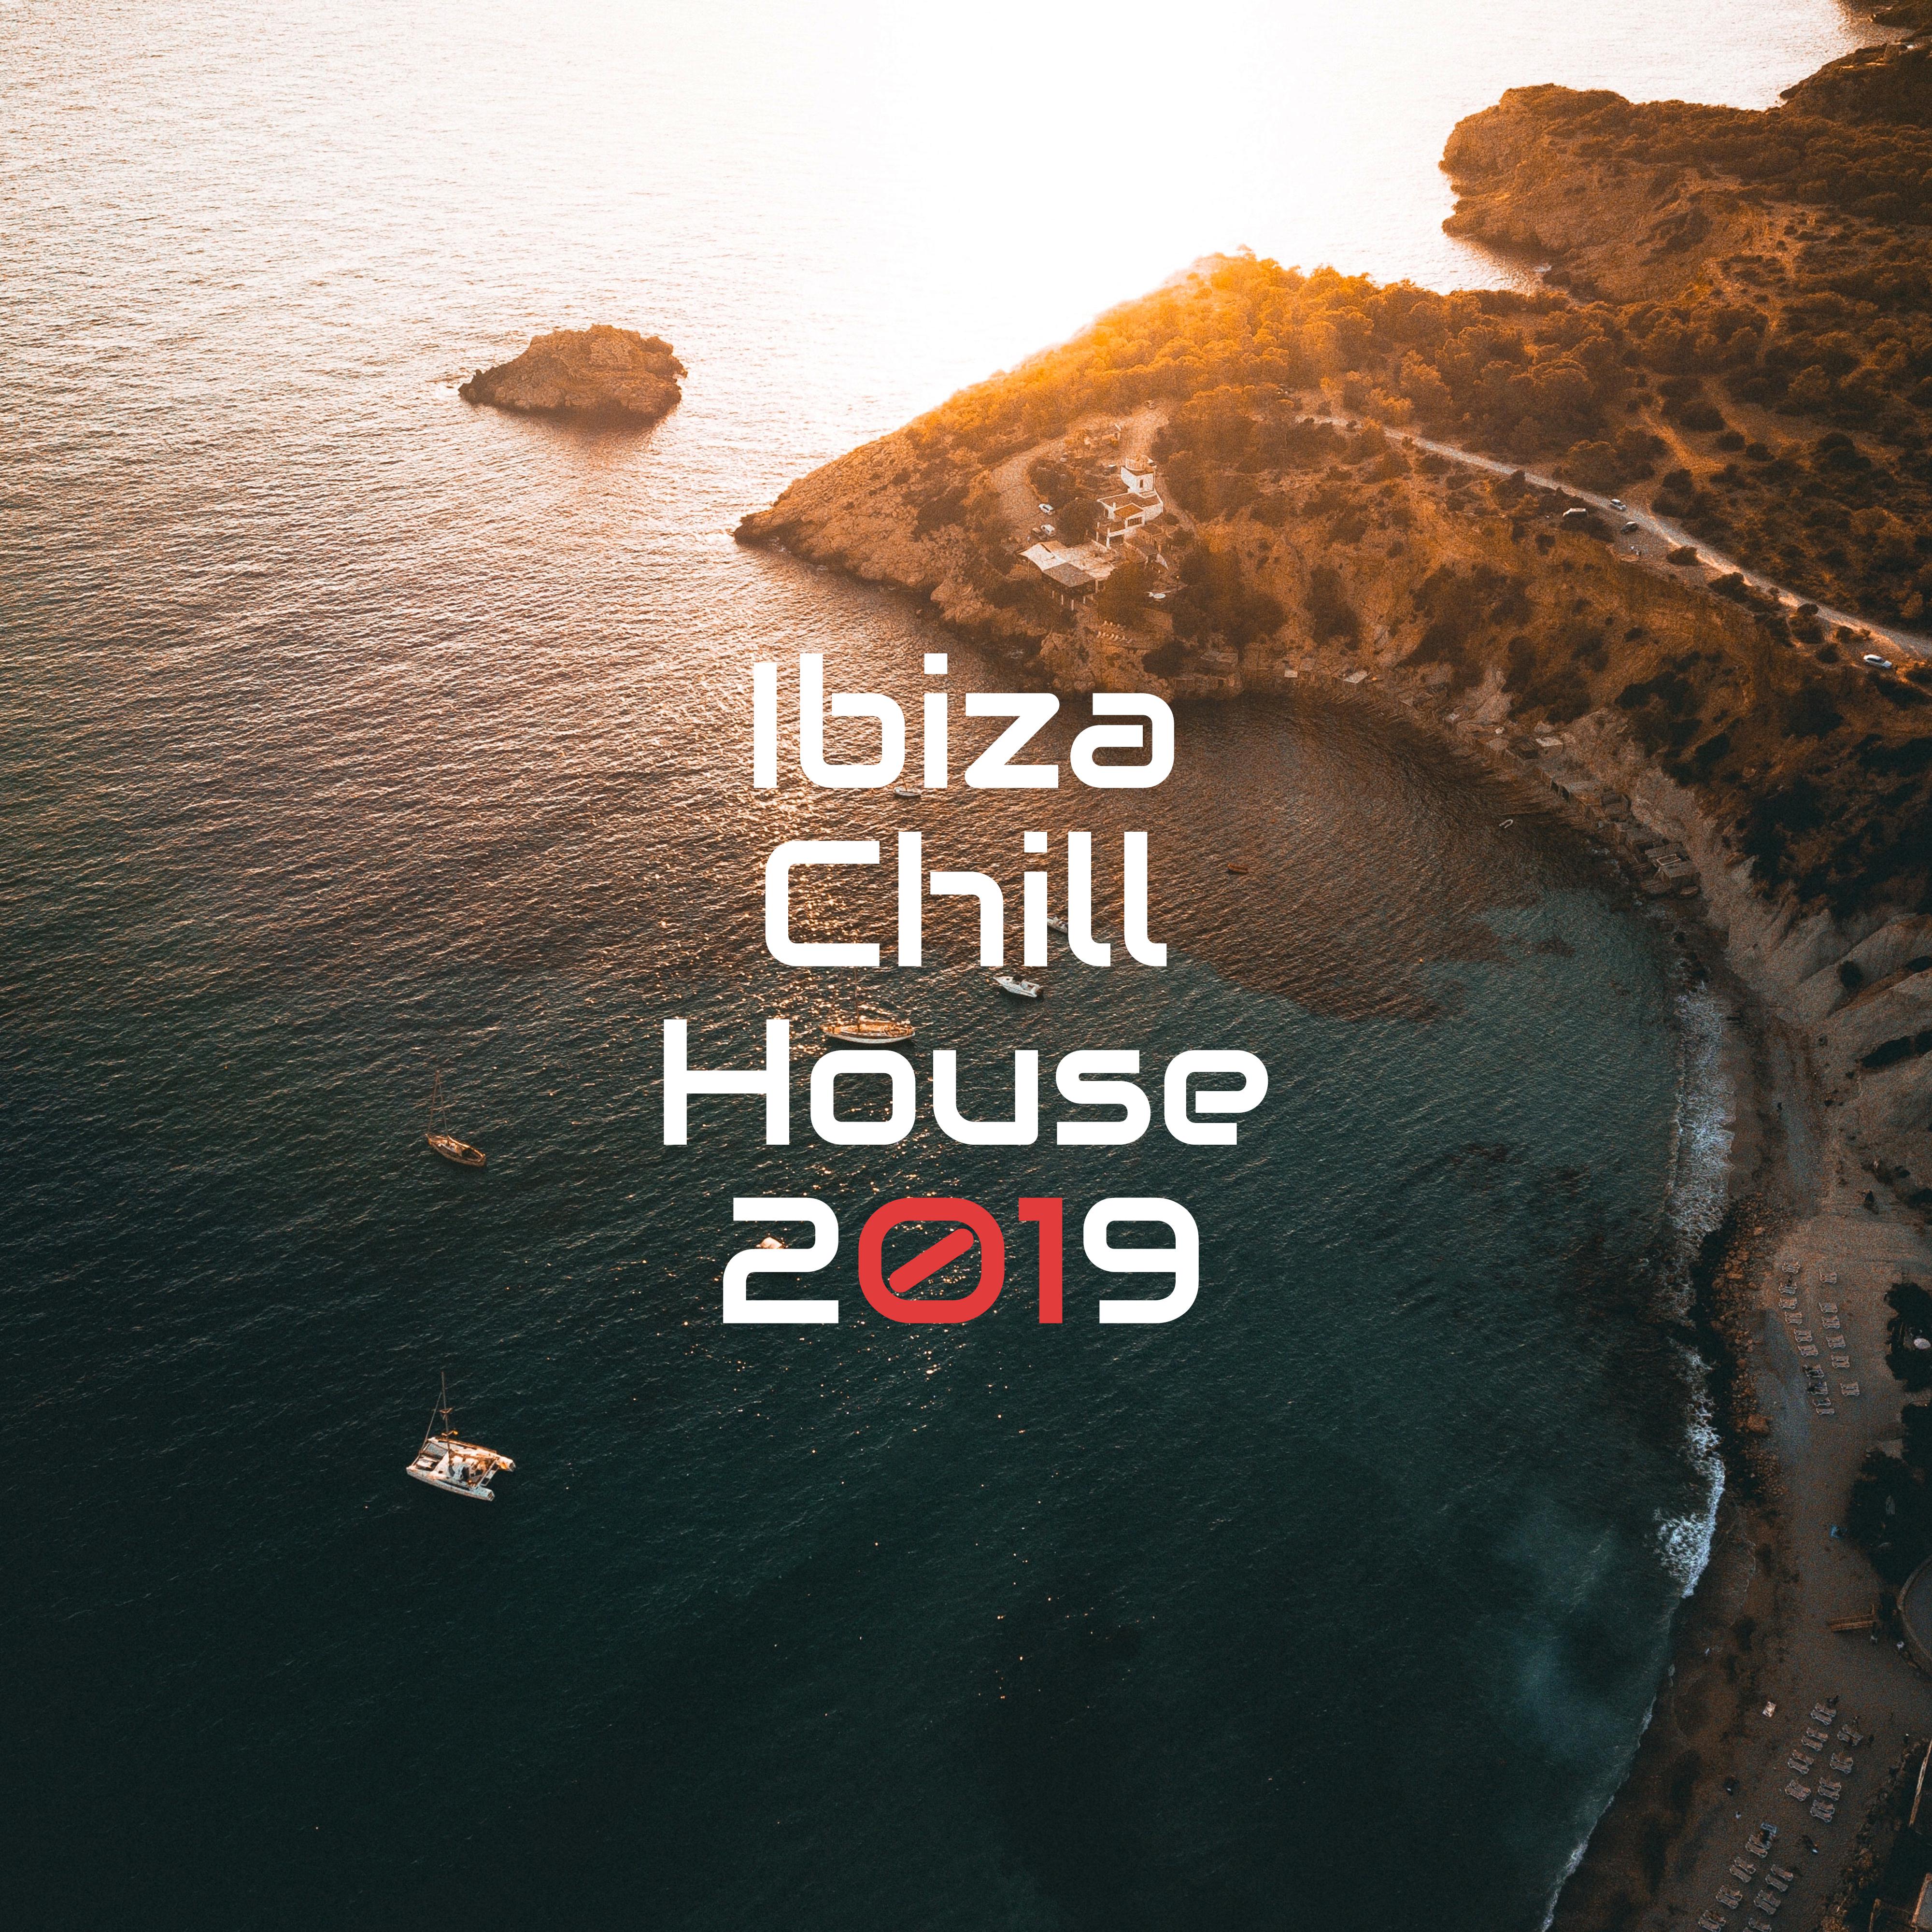 Ibiza Chill House 2019 – Ibiza Dance Party, Summer Relax, Beach Chill, **** Vibes, Deep Relaxation, Music Zone